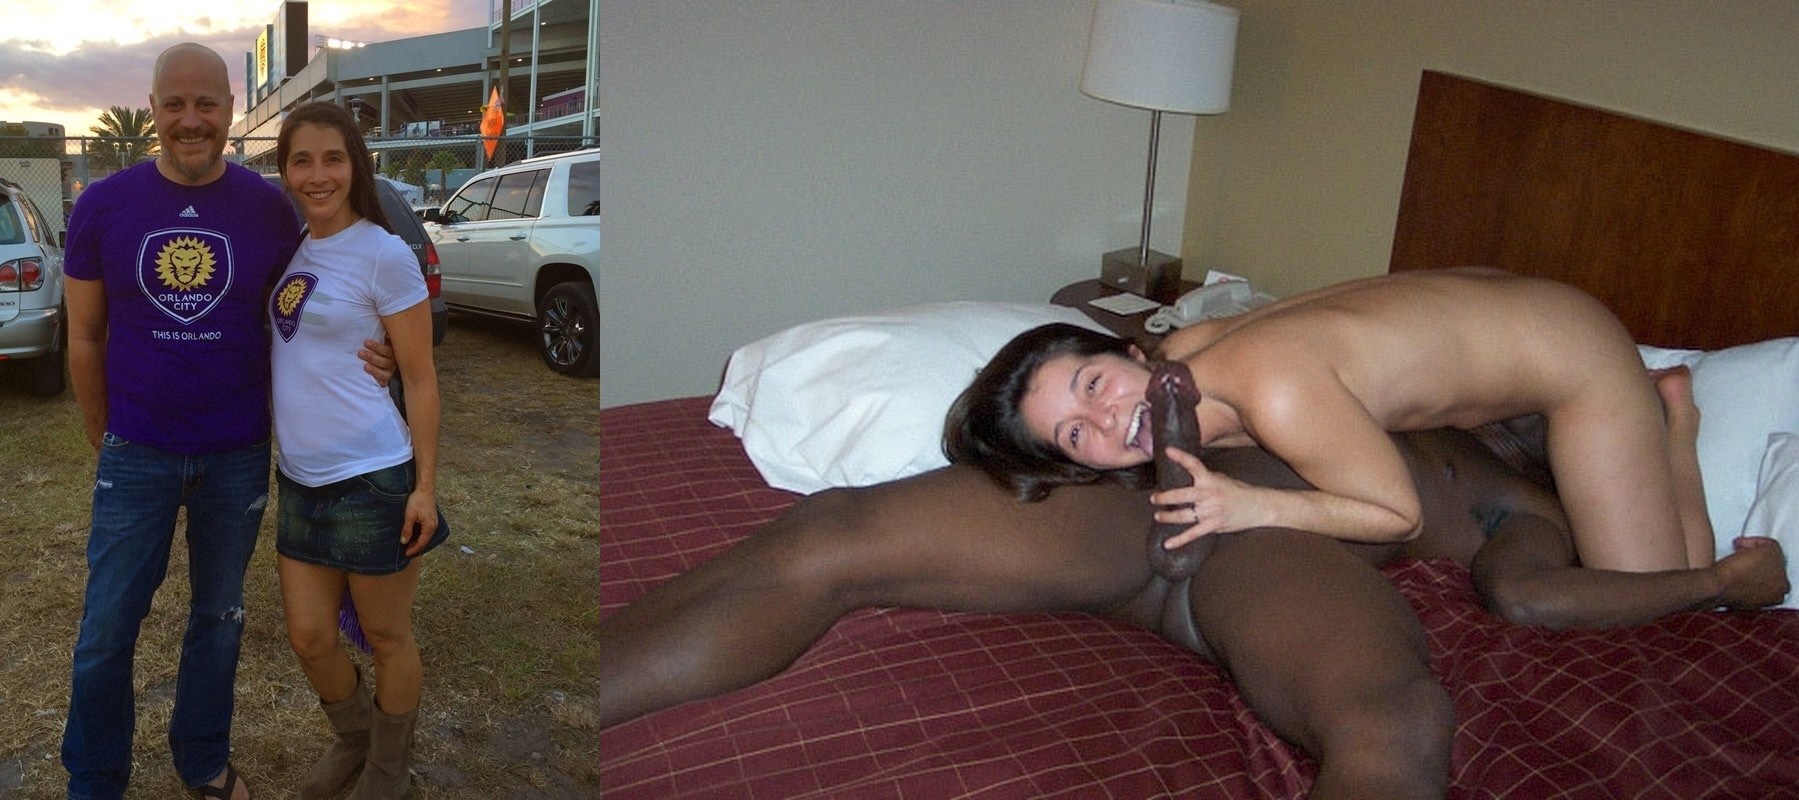 Archive of the Wife and Her Fuck on a Business Trip (67 photos)